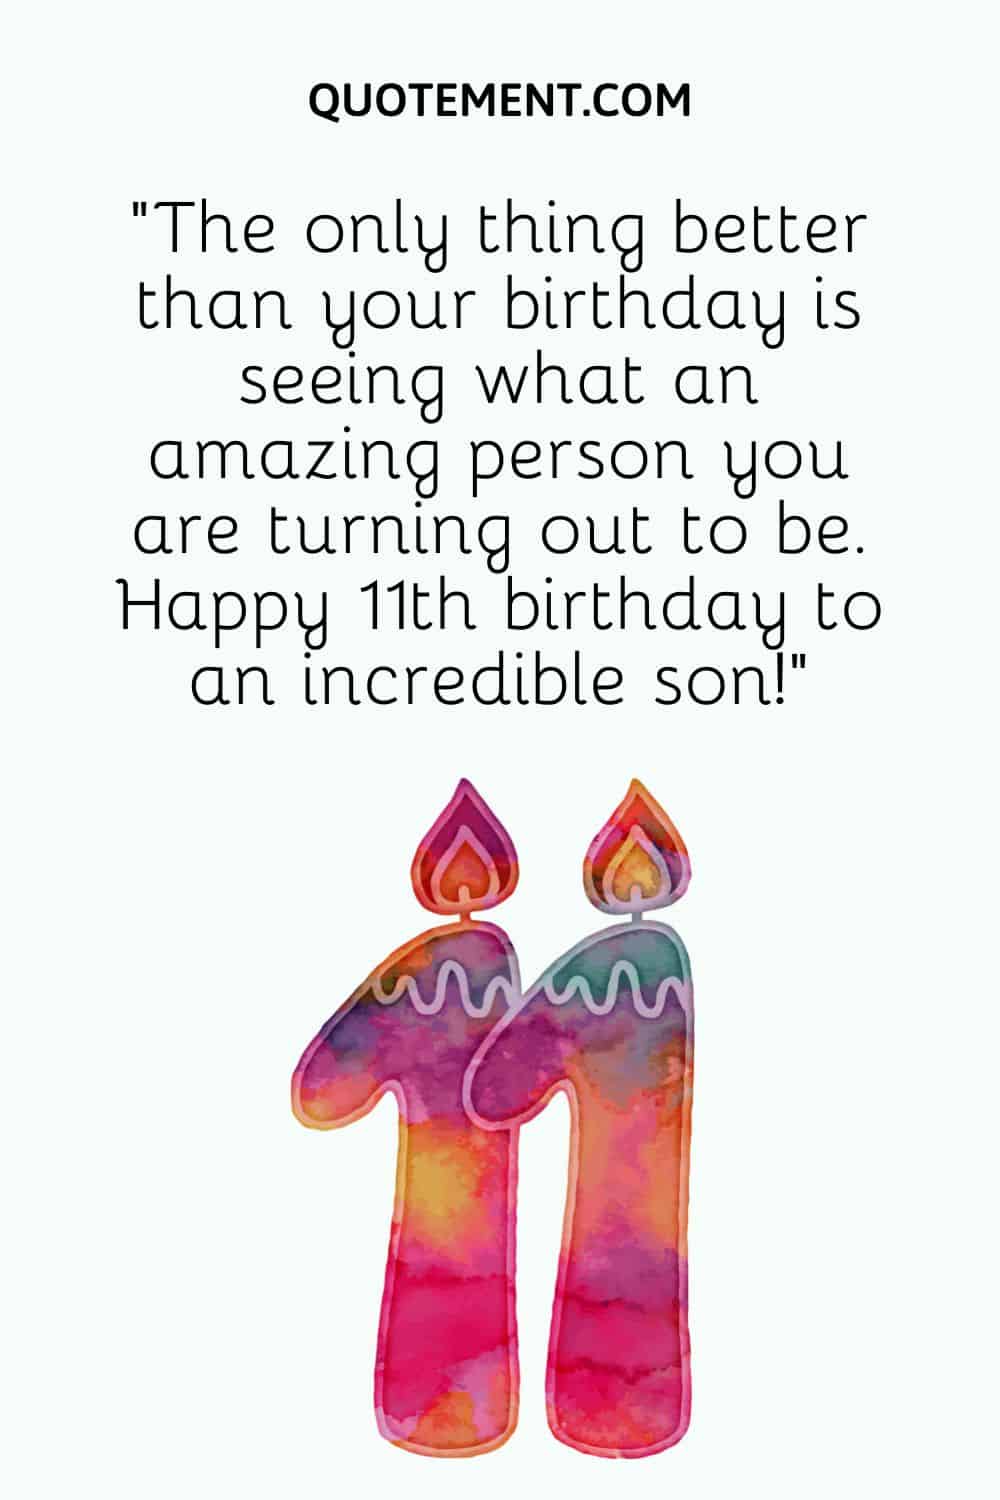 “The only thing better than your birthday is seeing what an amazing person you are turning out to be. Happy 11th birthday to an incredible son!”